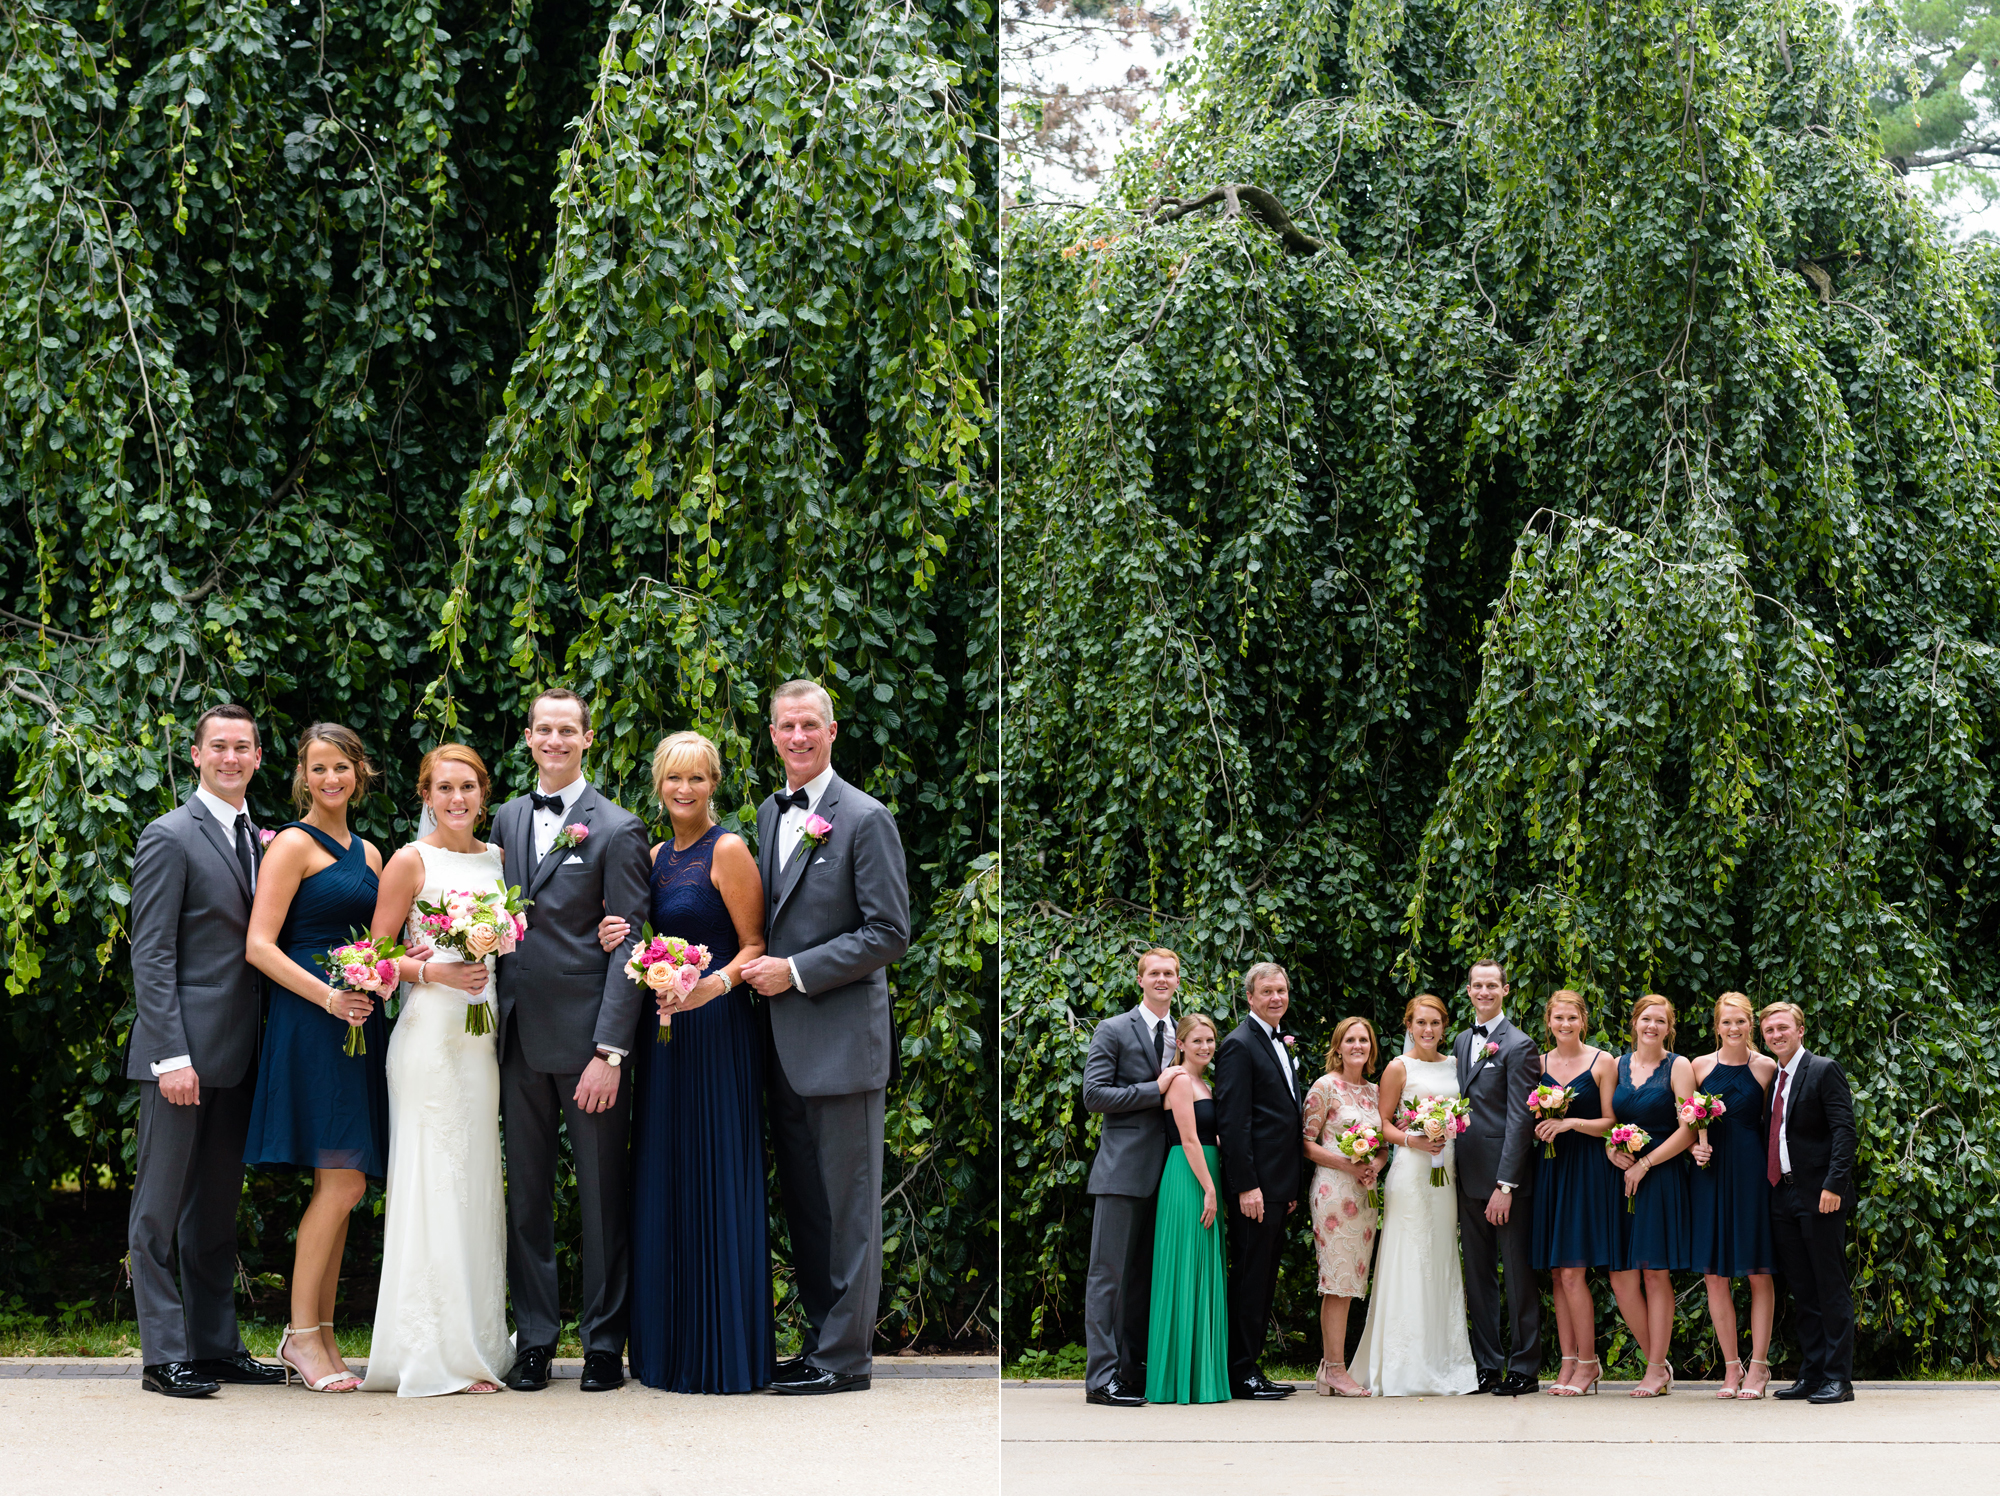 Family Portraits in front of an exotic California inspired tree after a wedding ceremony at the Basilica of the Sacred Heart on the campus of the University of Notre Dame